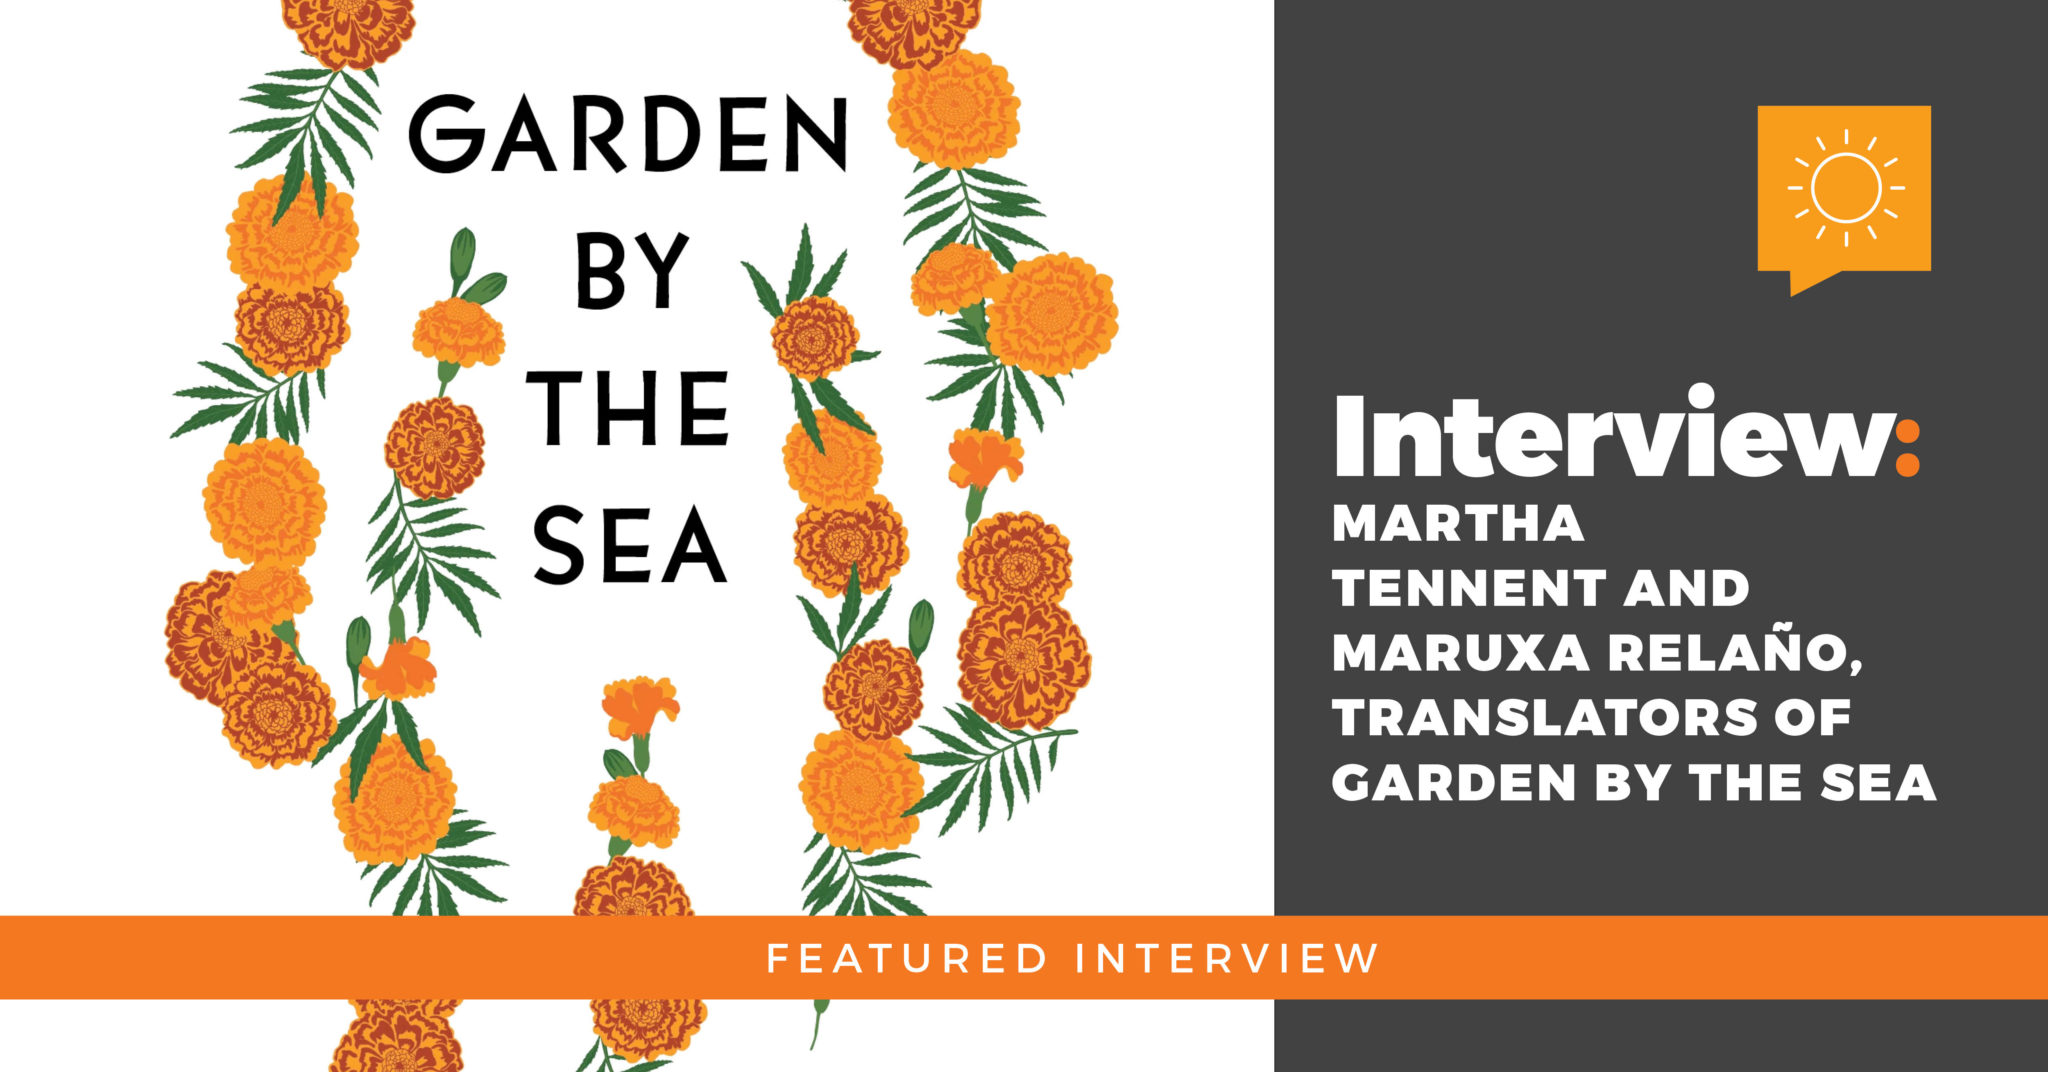 Interview: Martha Tennent and Maruxa Relaño, Translators of Garden By The Sea